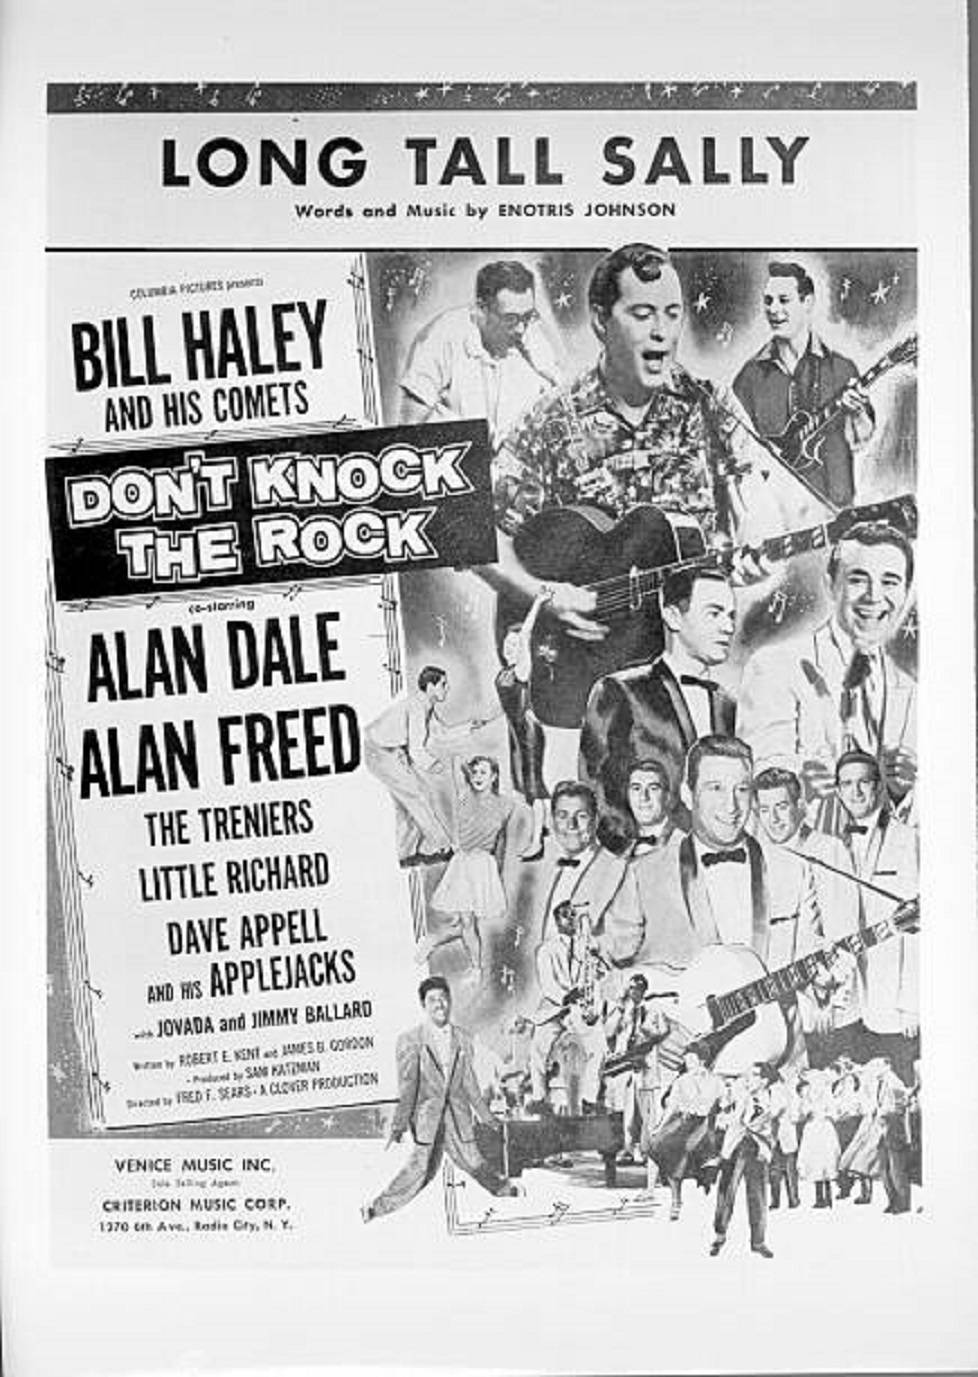 Bill Haley And The Comets Concert Poster Wallpaper